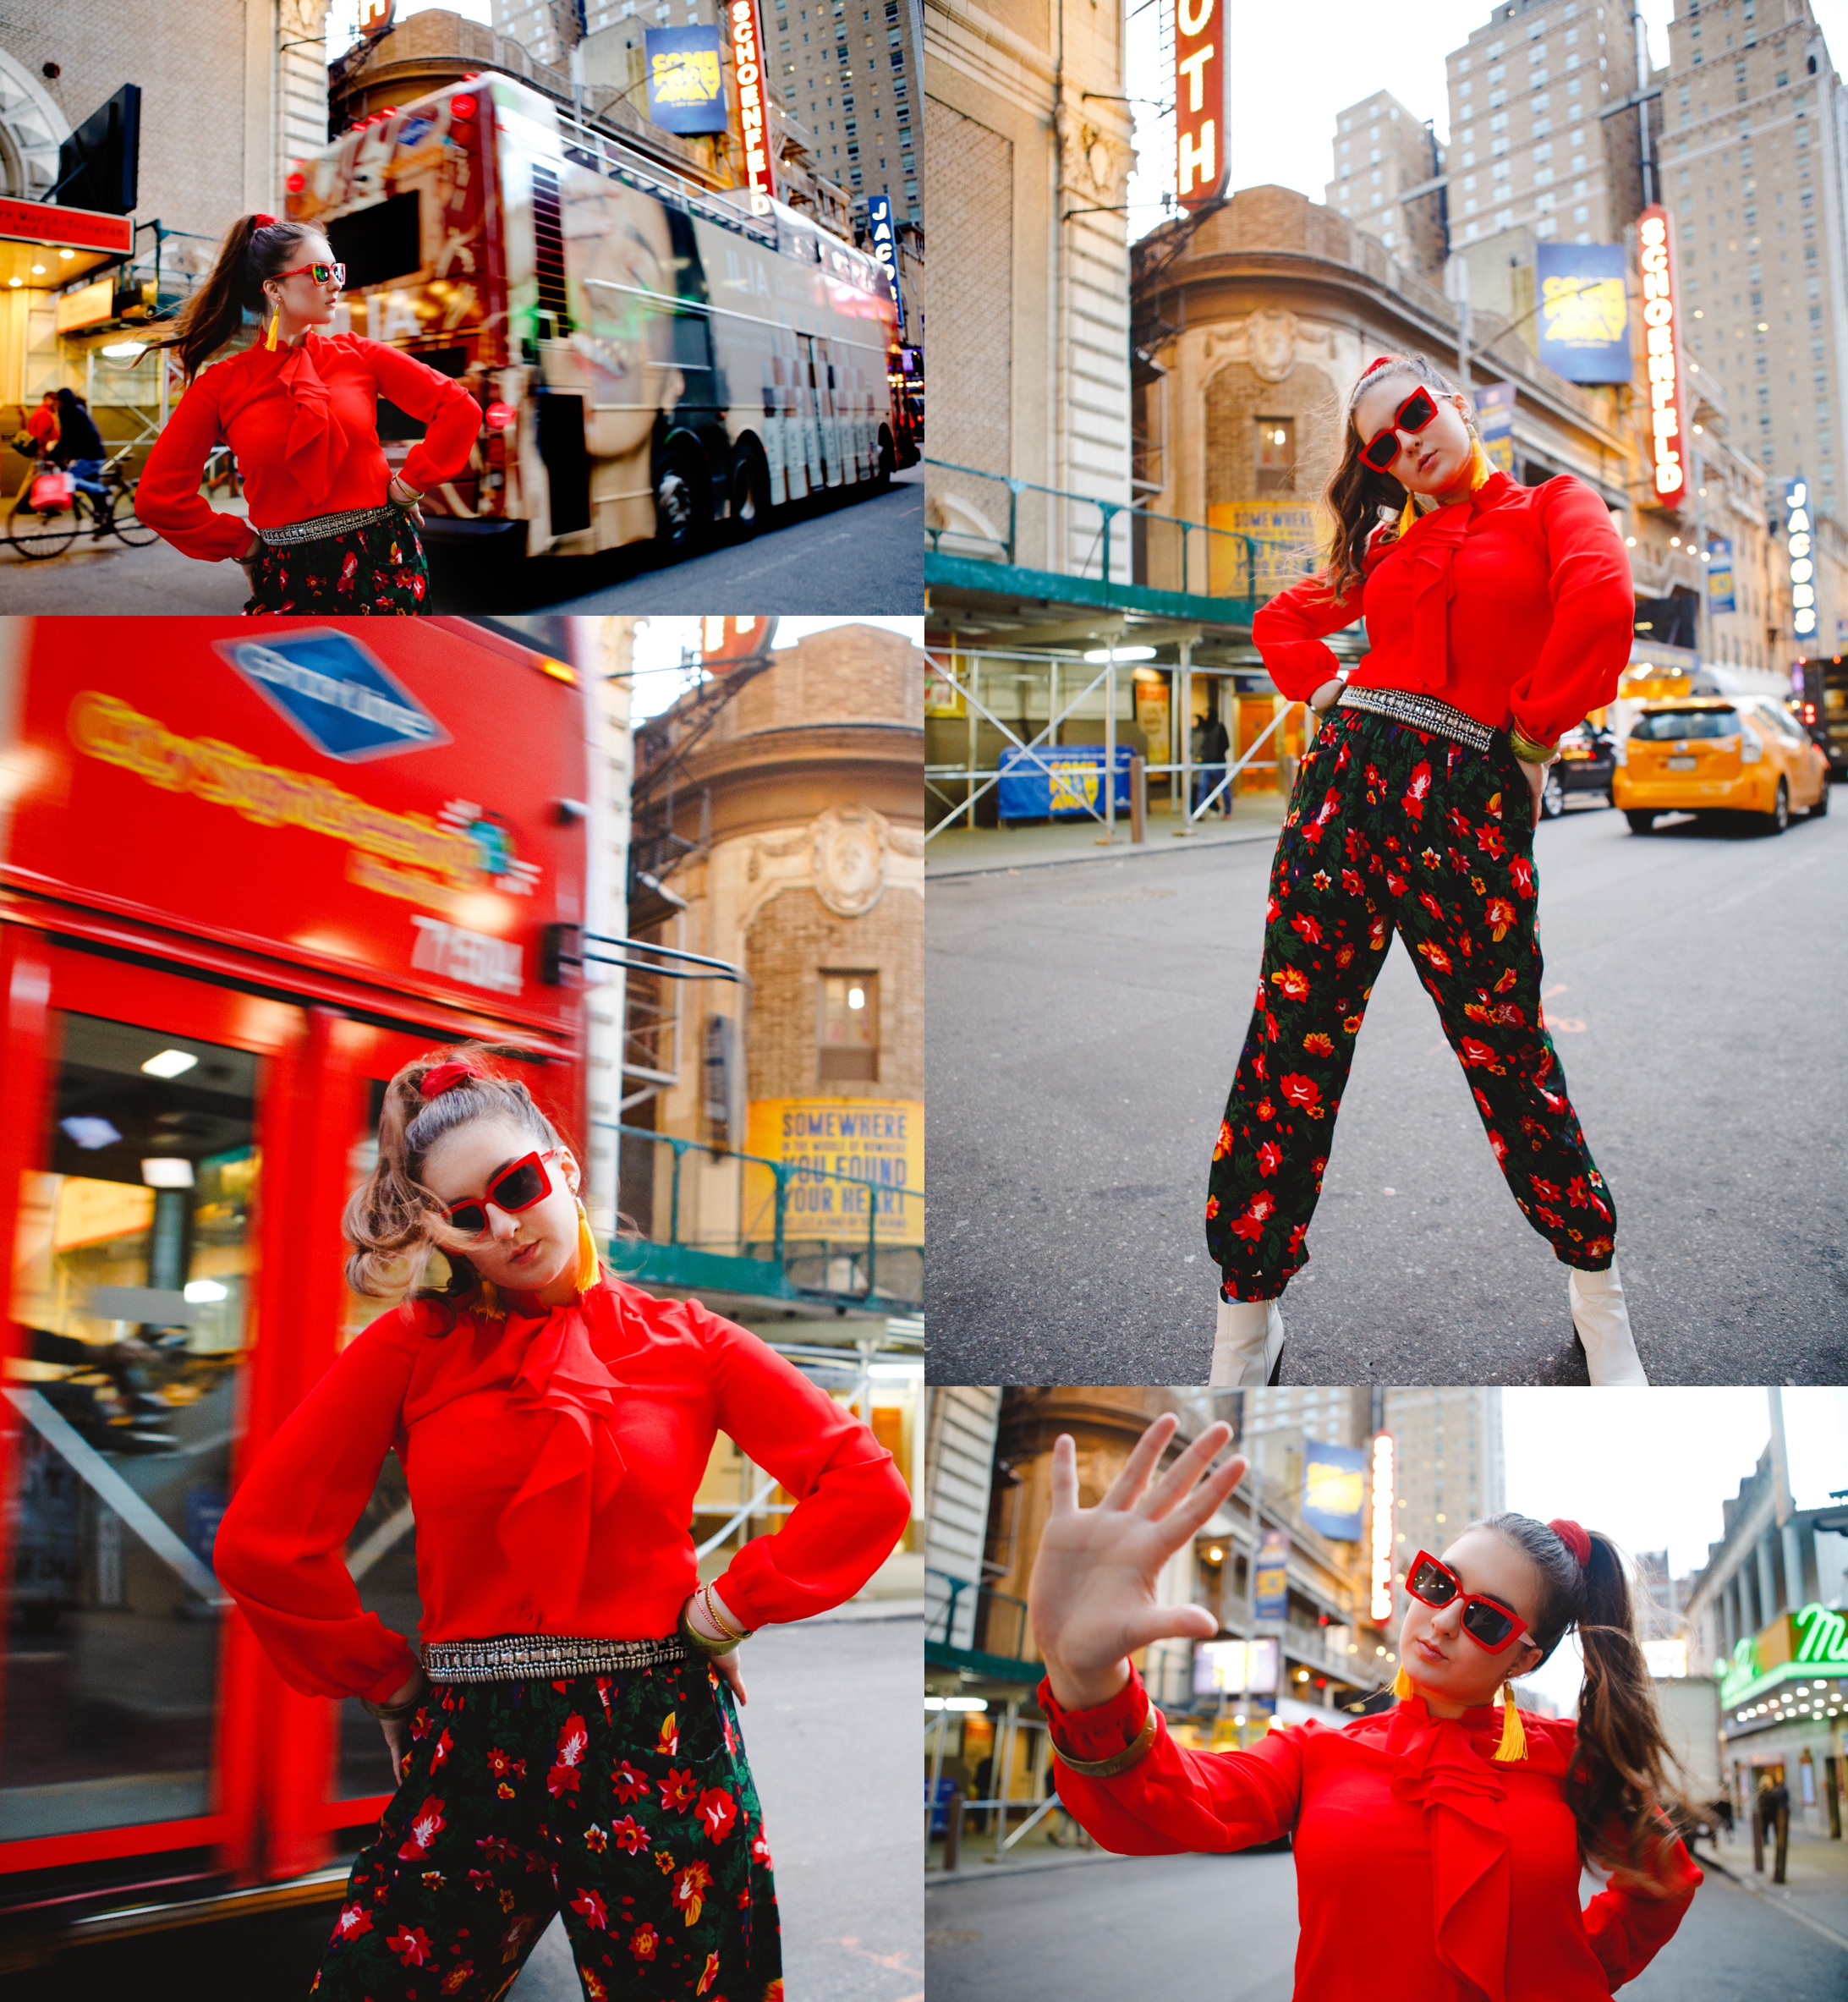 Brunette wearing floral pants, red sunglasses, and red blouse in middle of city street in NYC